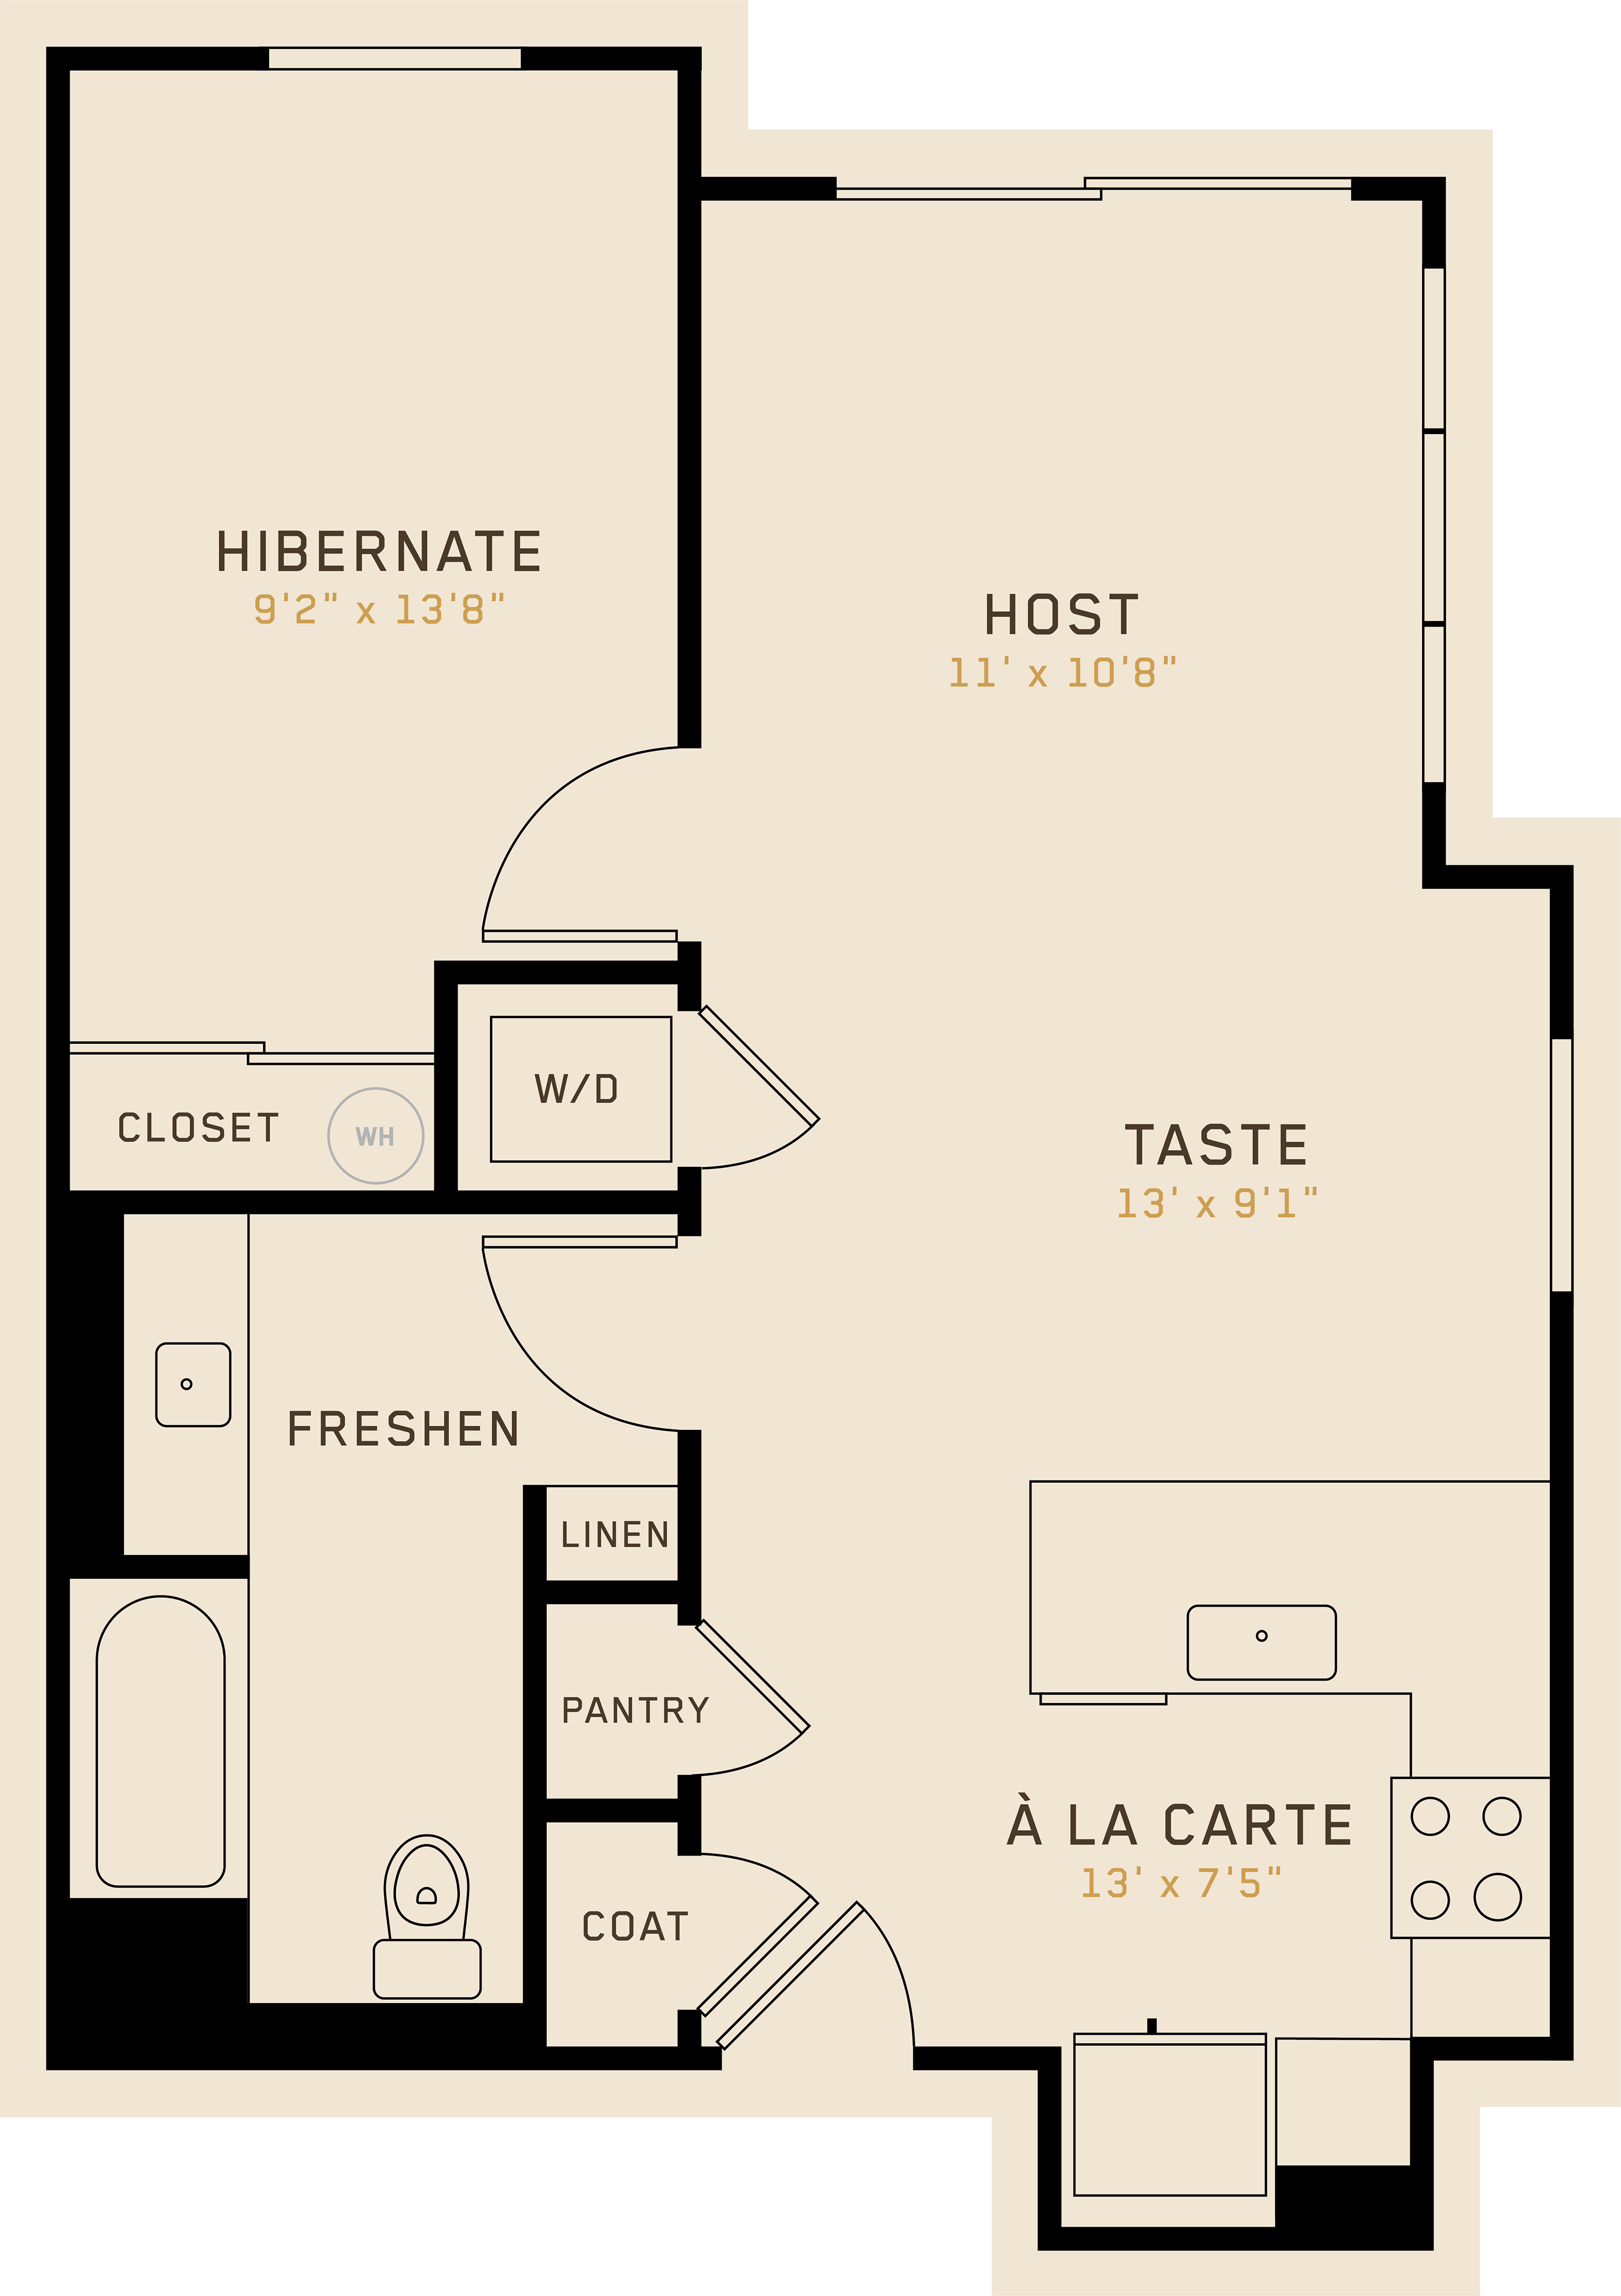 A1K floor plan featuring 1 bedroom, 1 bathroom, and is 704 square feet